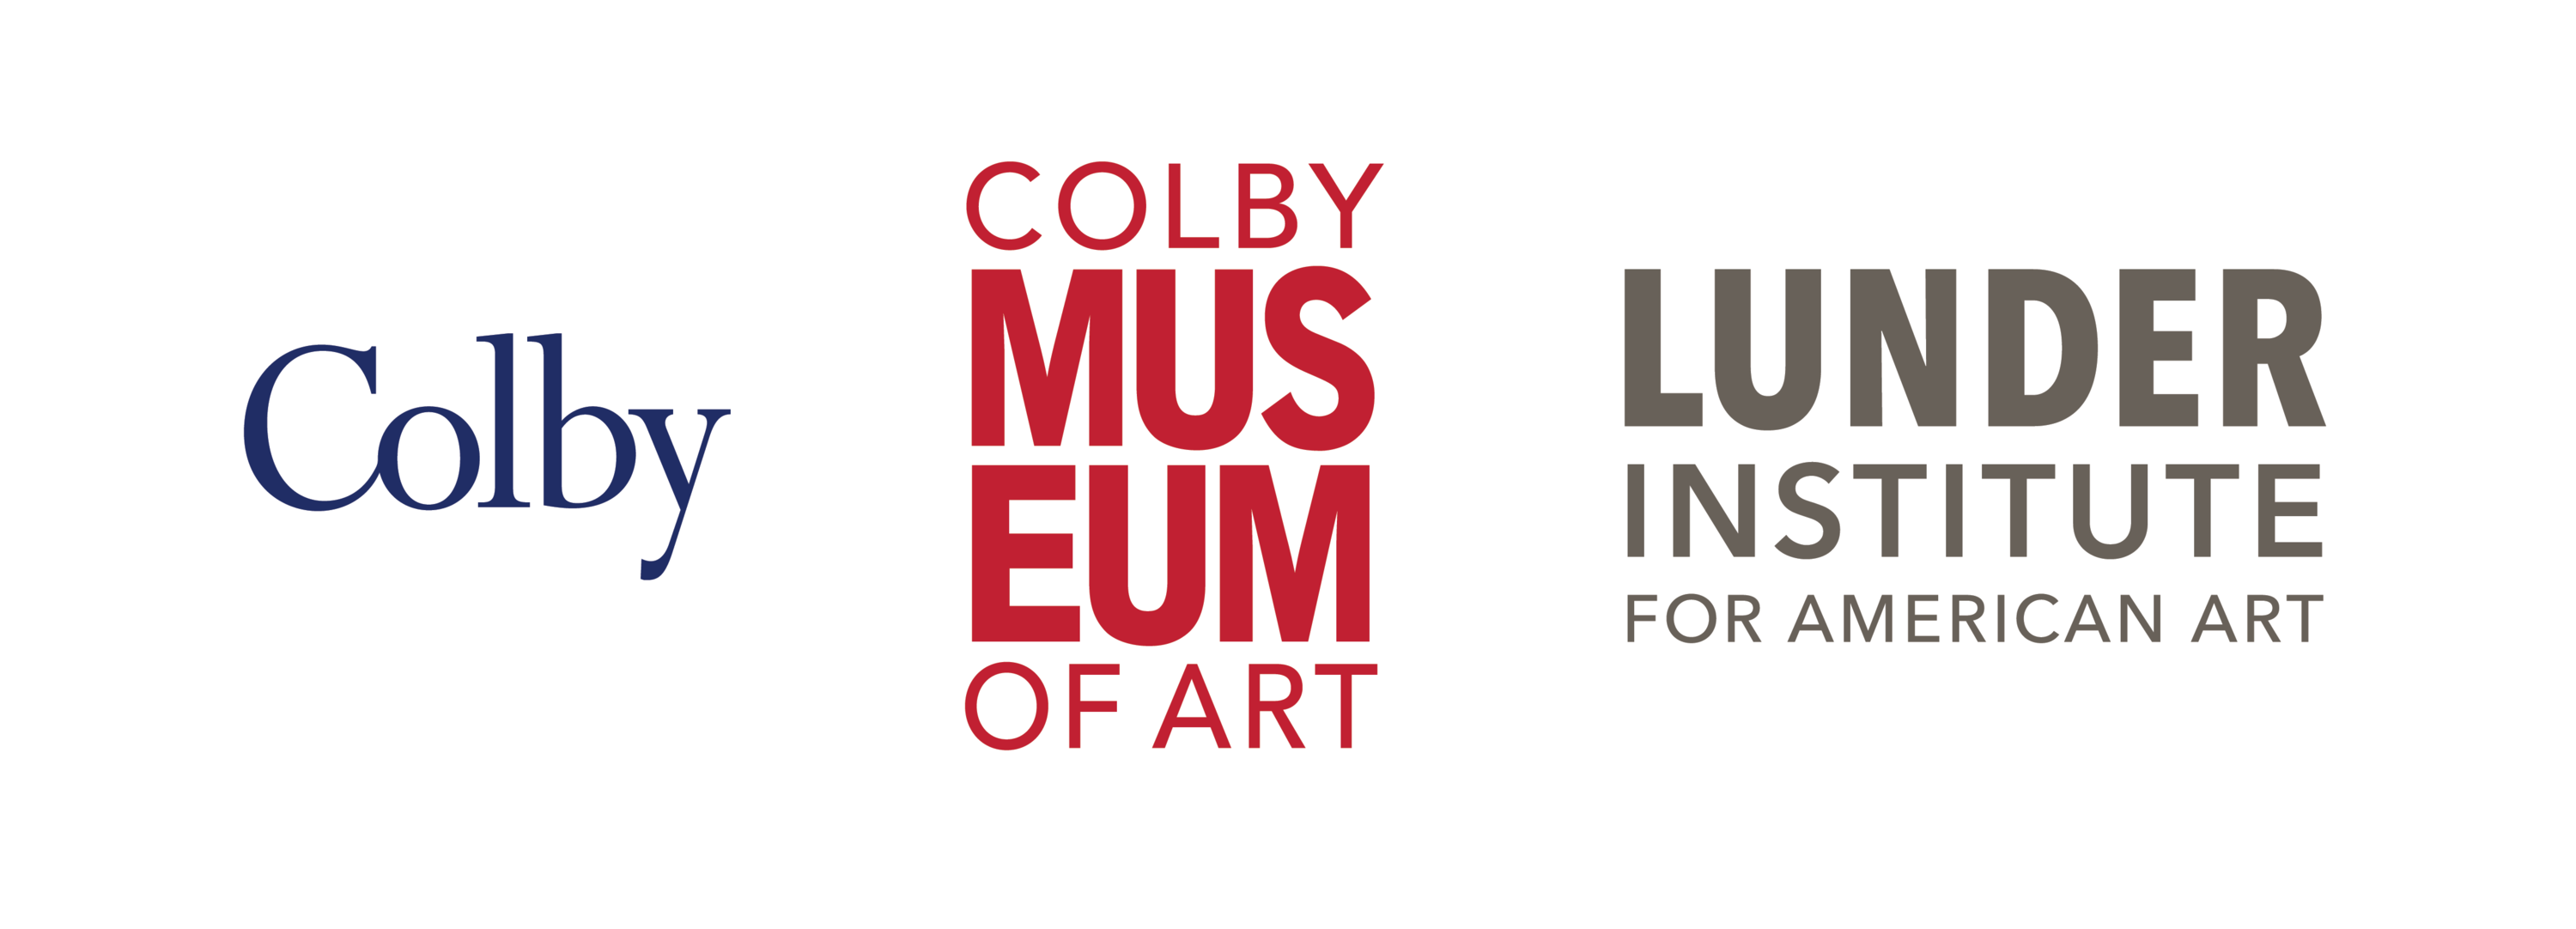 Logos for Colby, Colby Museum of Art and Lunder Institute for American Art